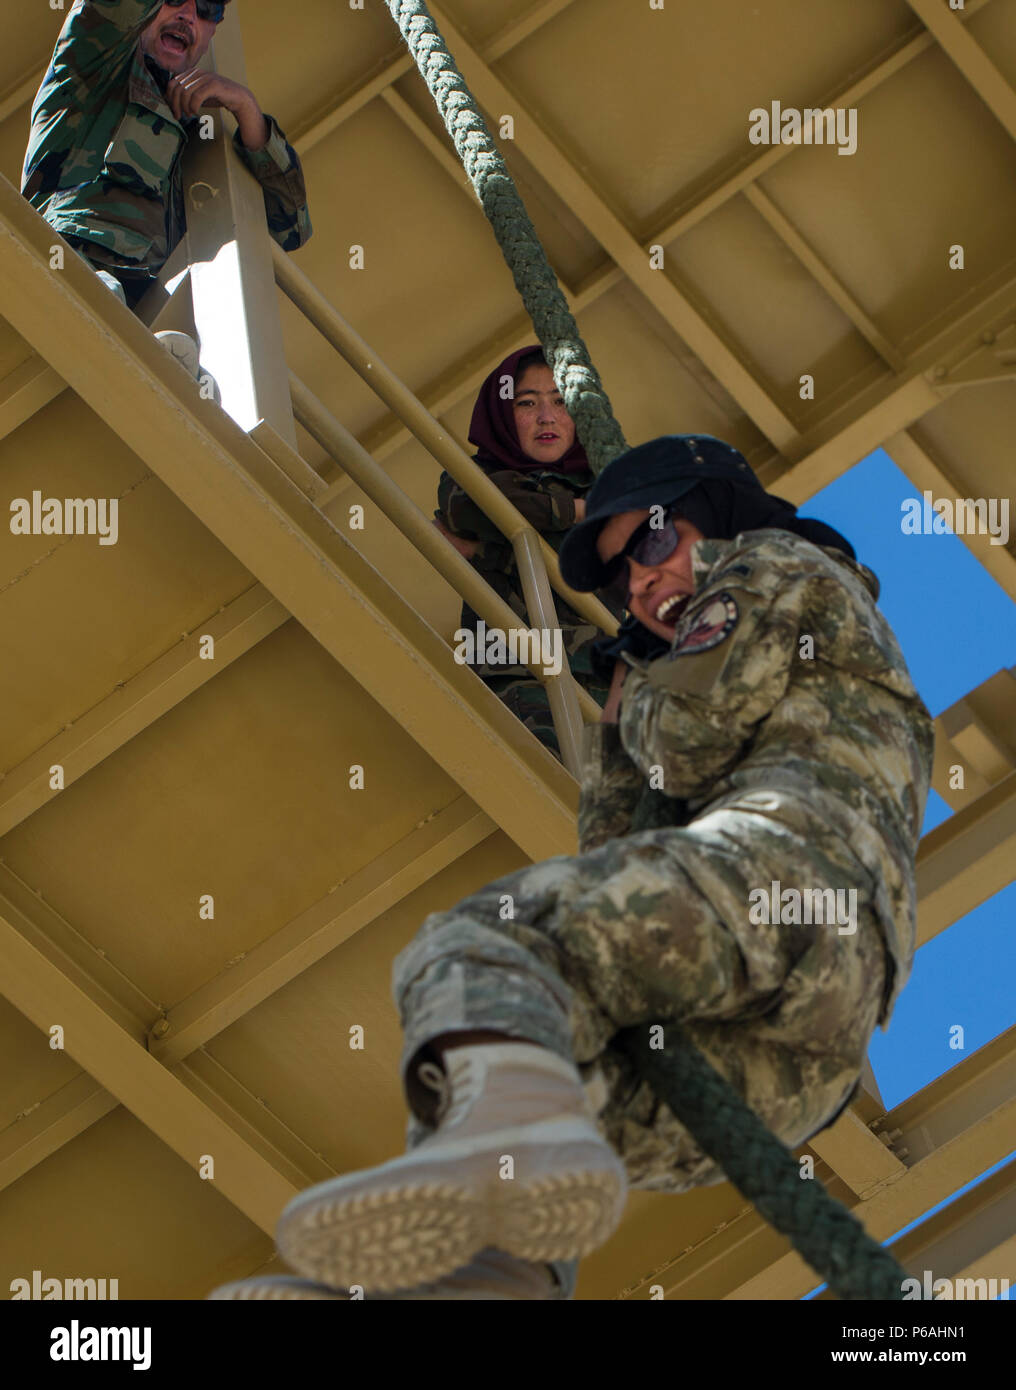 A Ktah Khas Afghan Female Tactical Platoon member participates in a fast roping training drill outside Kabul, Afghanistan May 29, 2016. The females work closely alongside the males on operations to engage and interact with women and children. The FTPs are trained in marksmanship, language, fast roping and other combat-related skills. (U.S. Air Force photo by Staff Sgt. Douglas Ellis/Released) Stock Photo